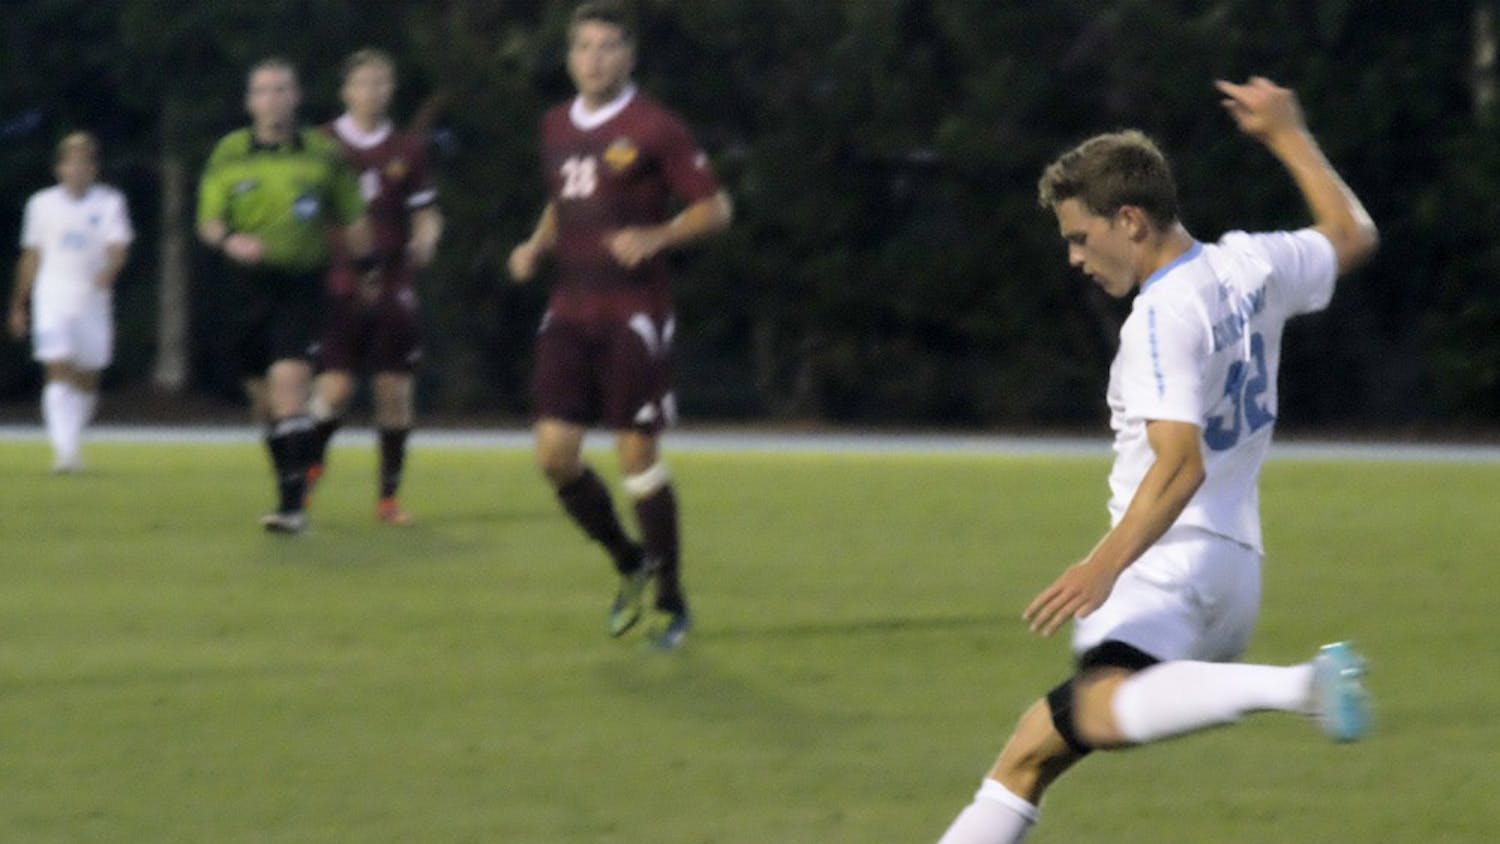 Luke Ciocca kicks the ball off to teammates during the Friday game against Winthrop.